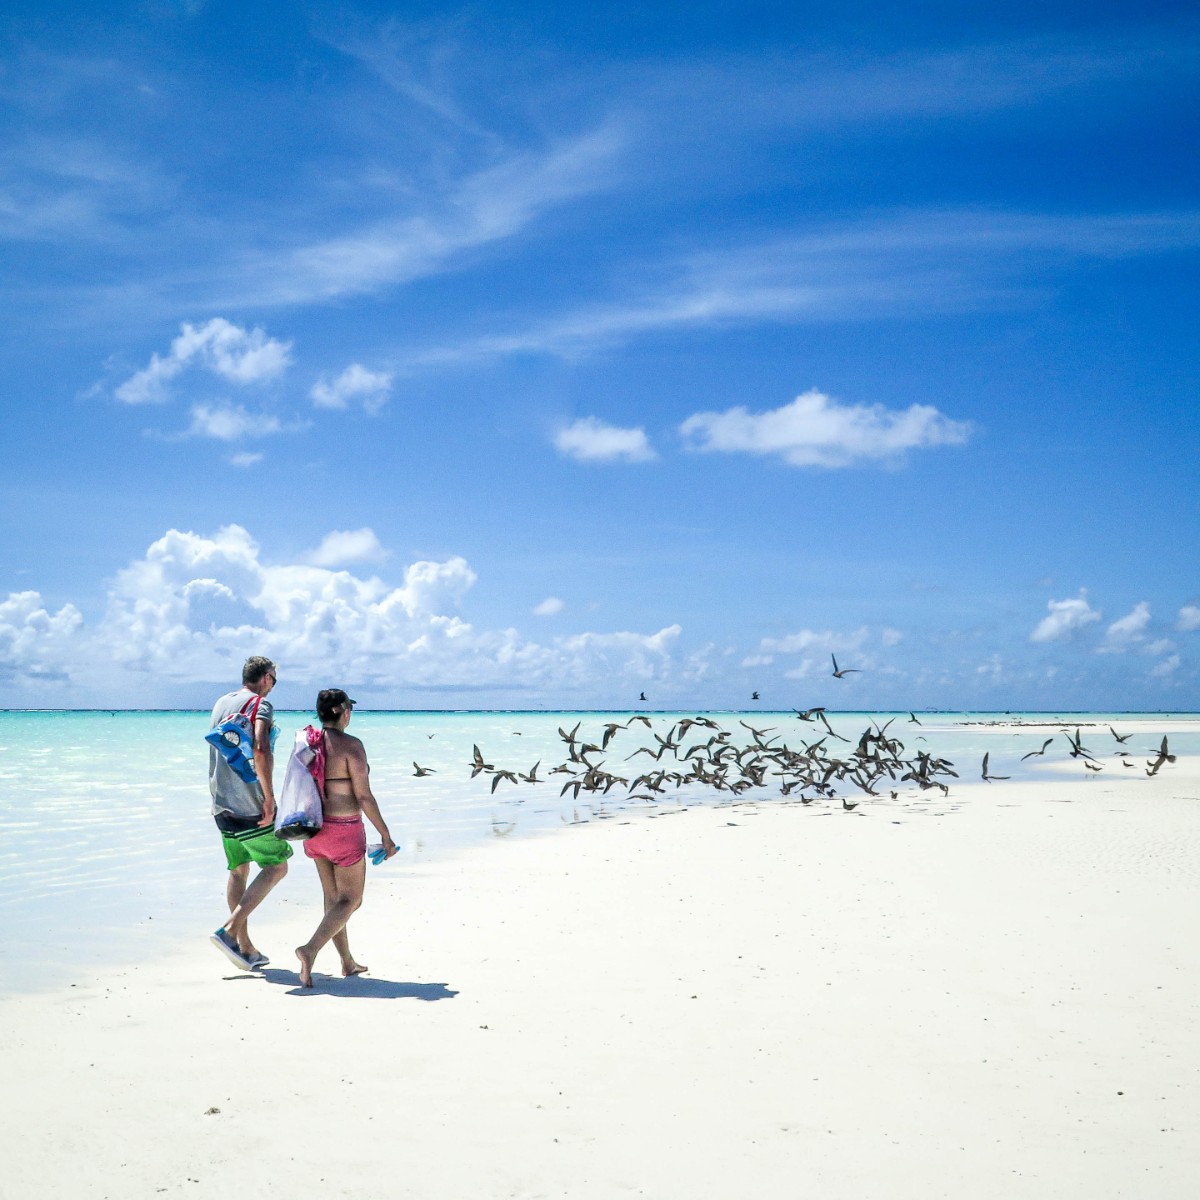 Two people walking down a white sand beach with blue skies in Tahiti - photo by Larissa Rolley, photography course creator at Wanderful